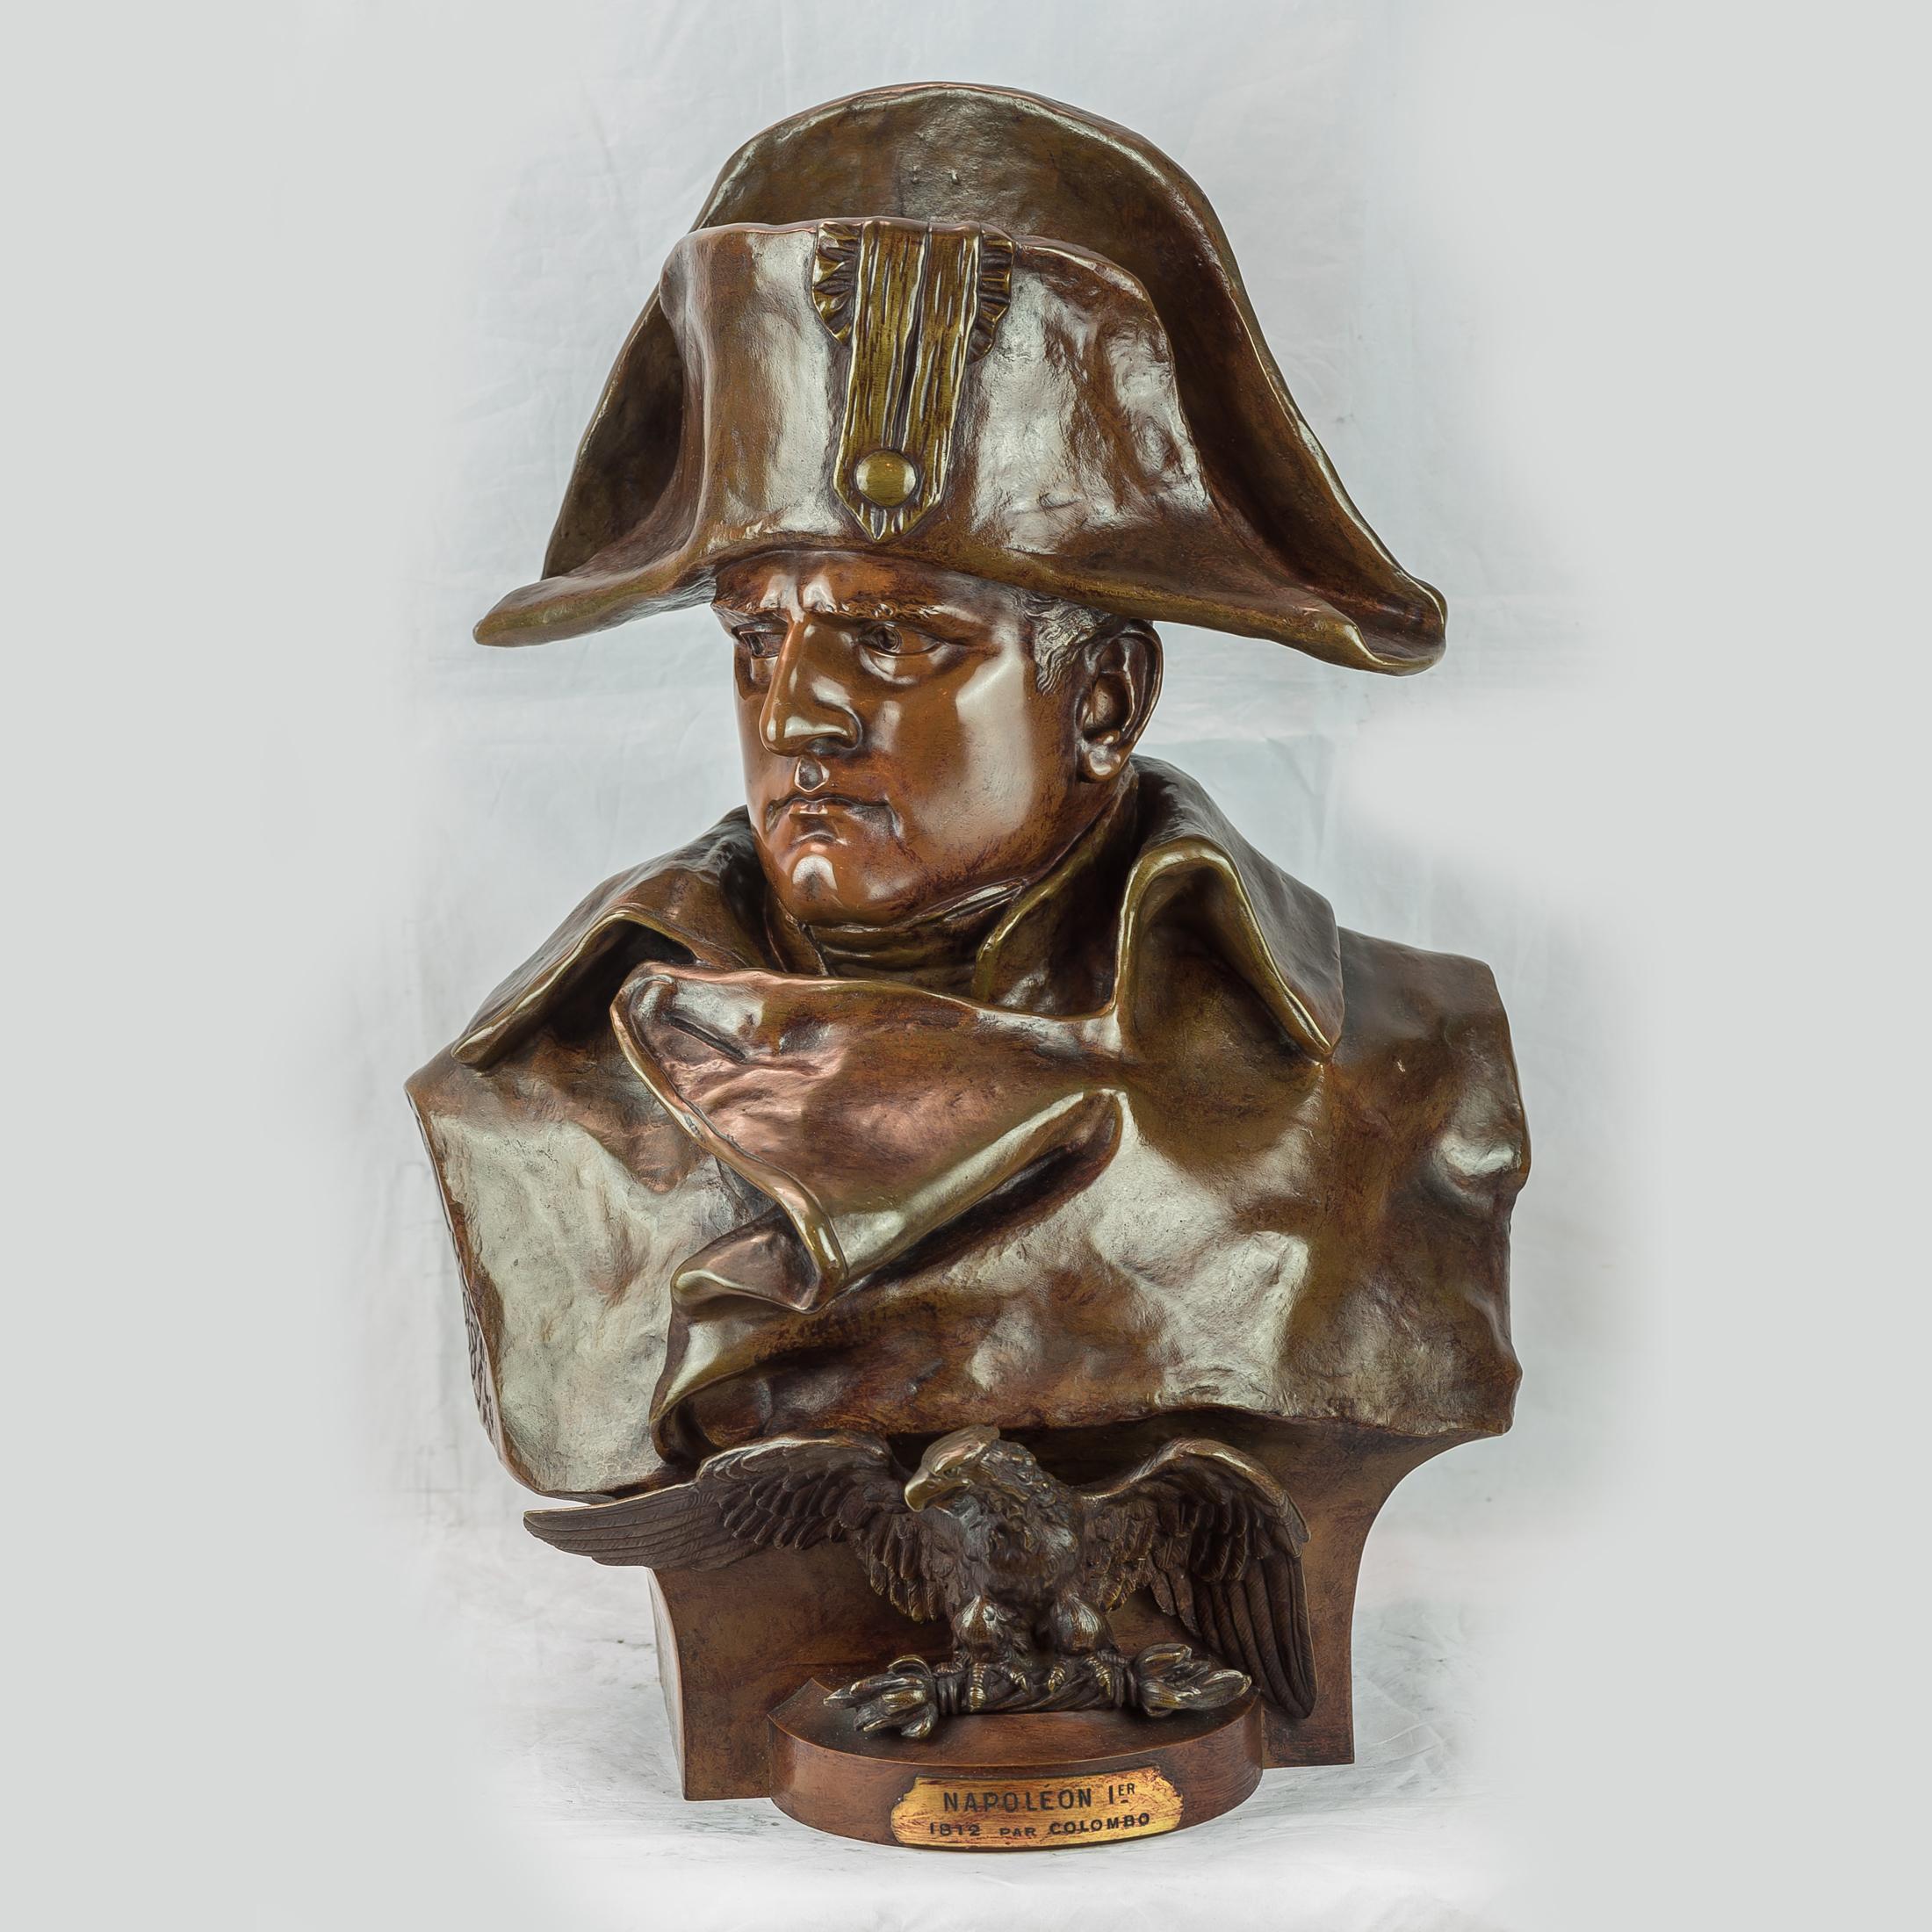 The bust depicts Napoleon having a firm expression or a determined commander, wearing his bicorne hat, an eagle spreading its wings below him.
Renzo Colombo (Italian 1856-1885), studied at the Brera Academy of Fine Art. After a period working in